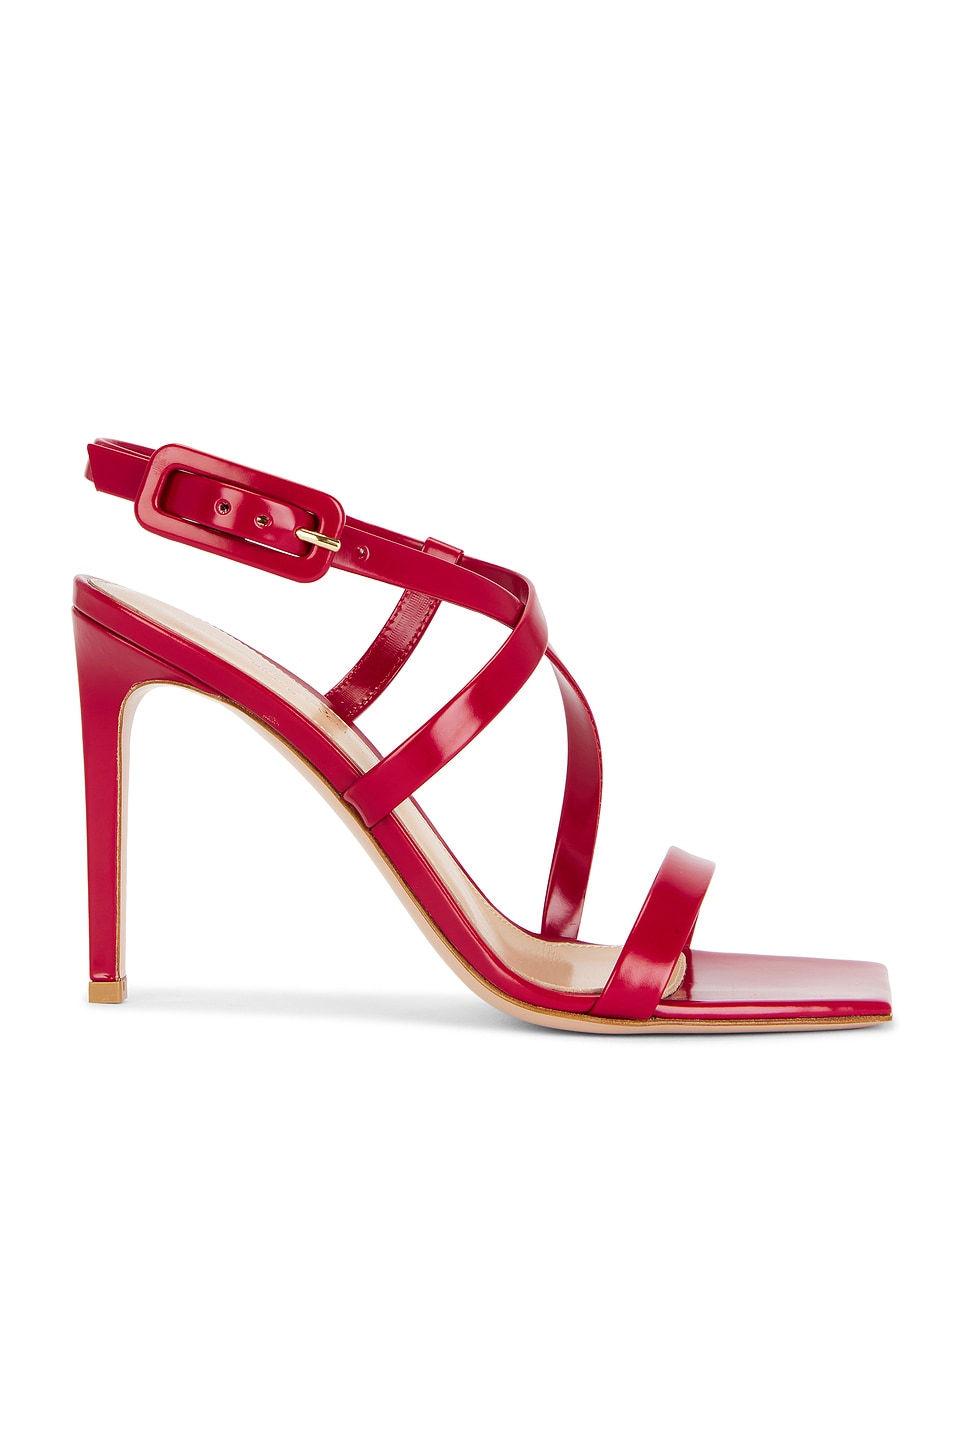 Image 1 of Gianvito Rossi Tokio Ankle Strap Sandal in Rouge